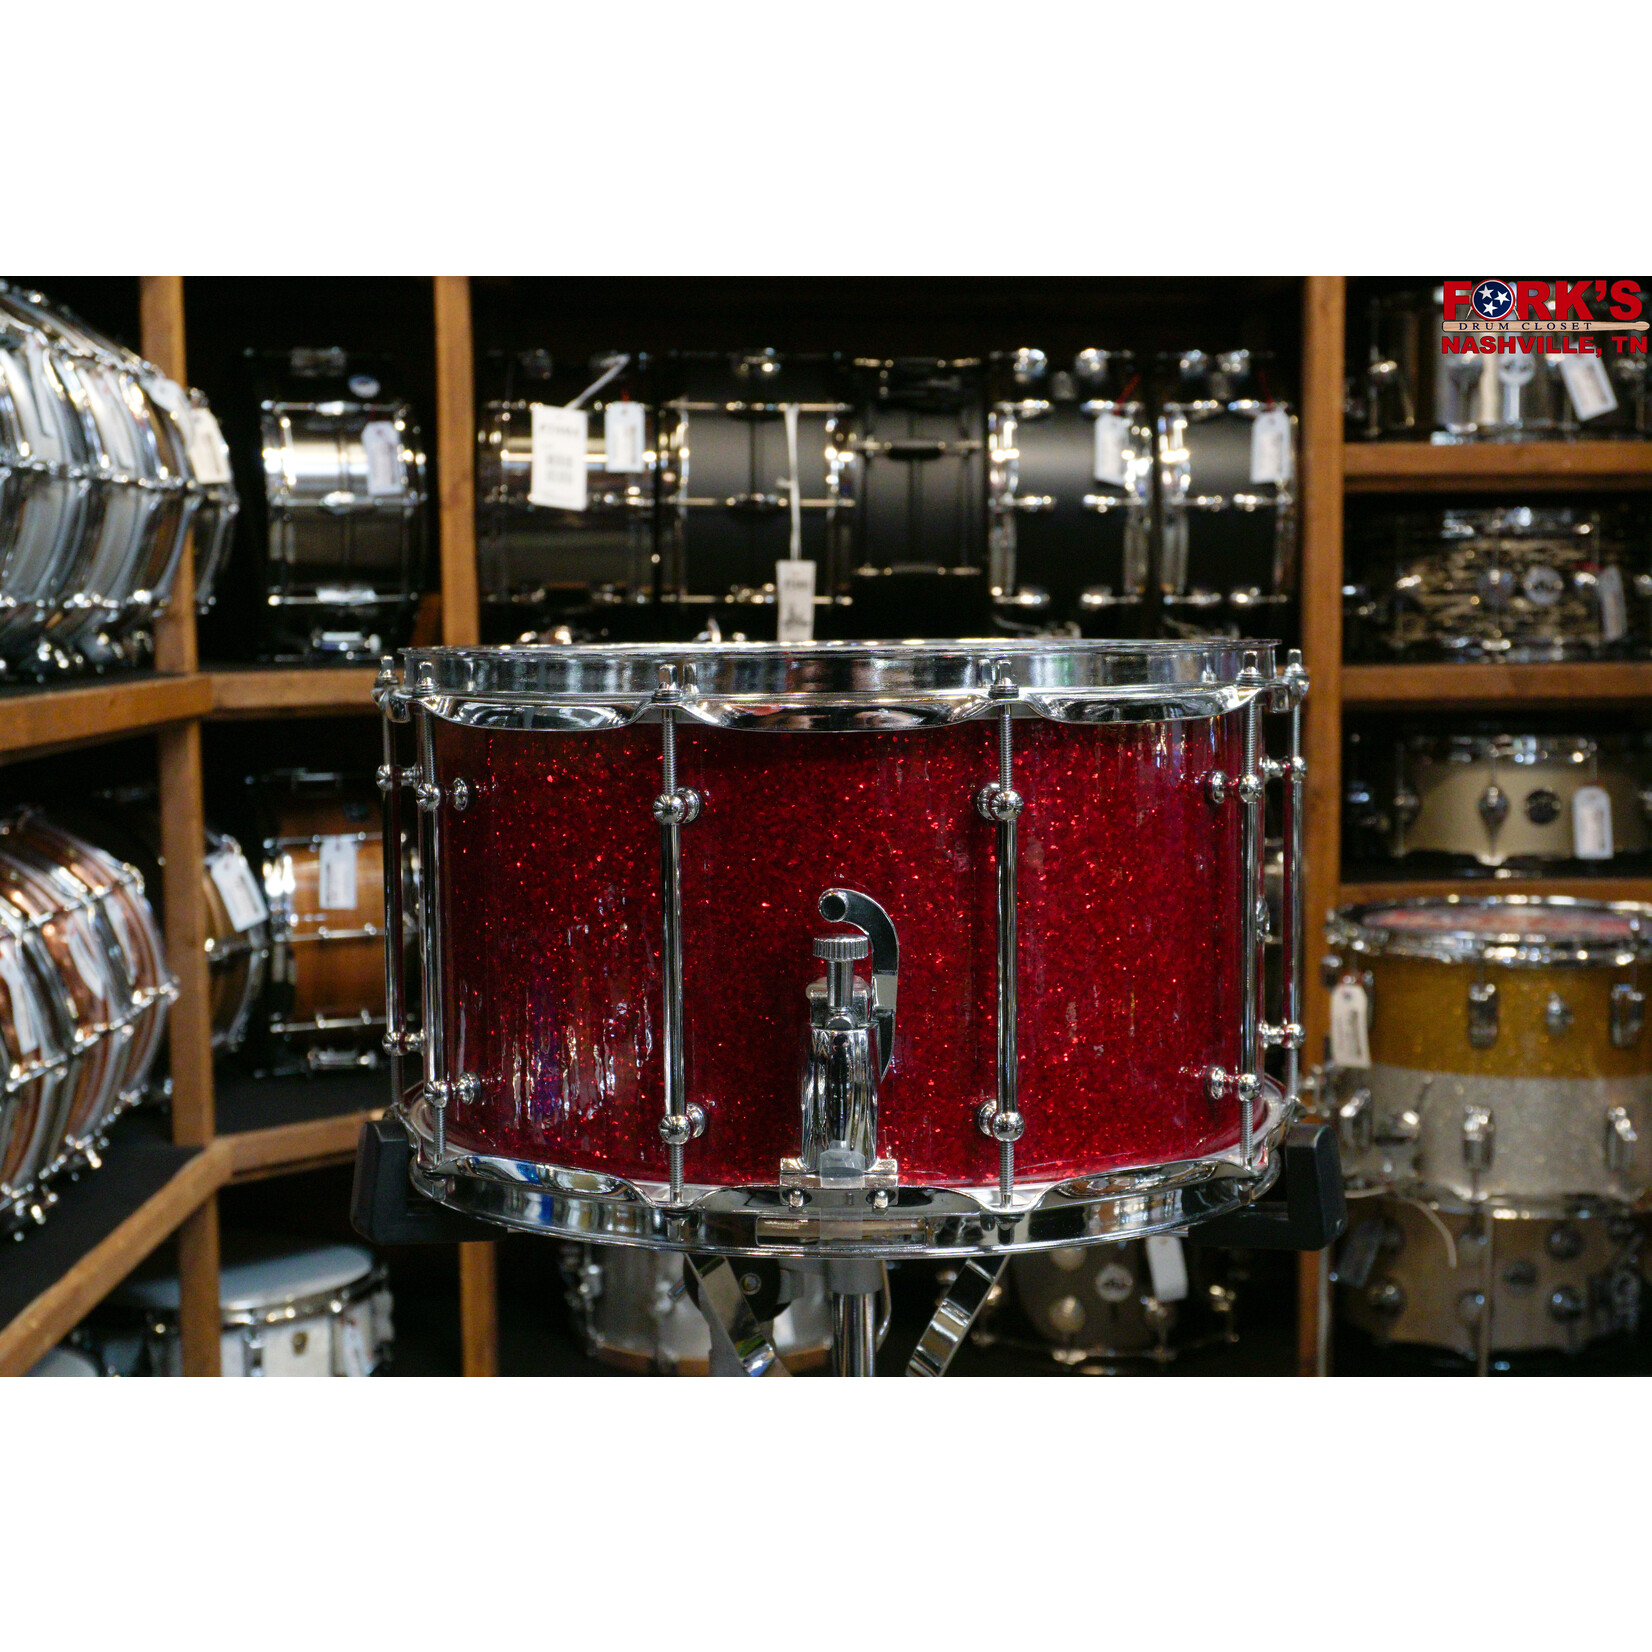 JJrums JJrums 8x14" Red Sparkle 8 ply Maple